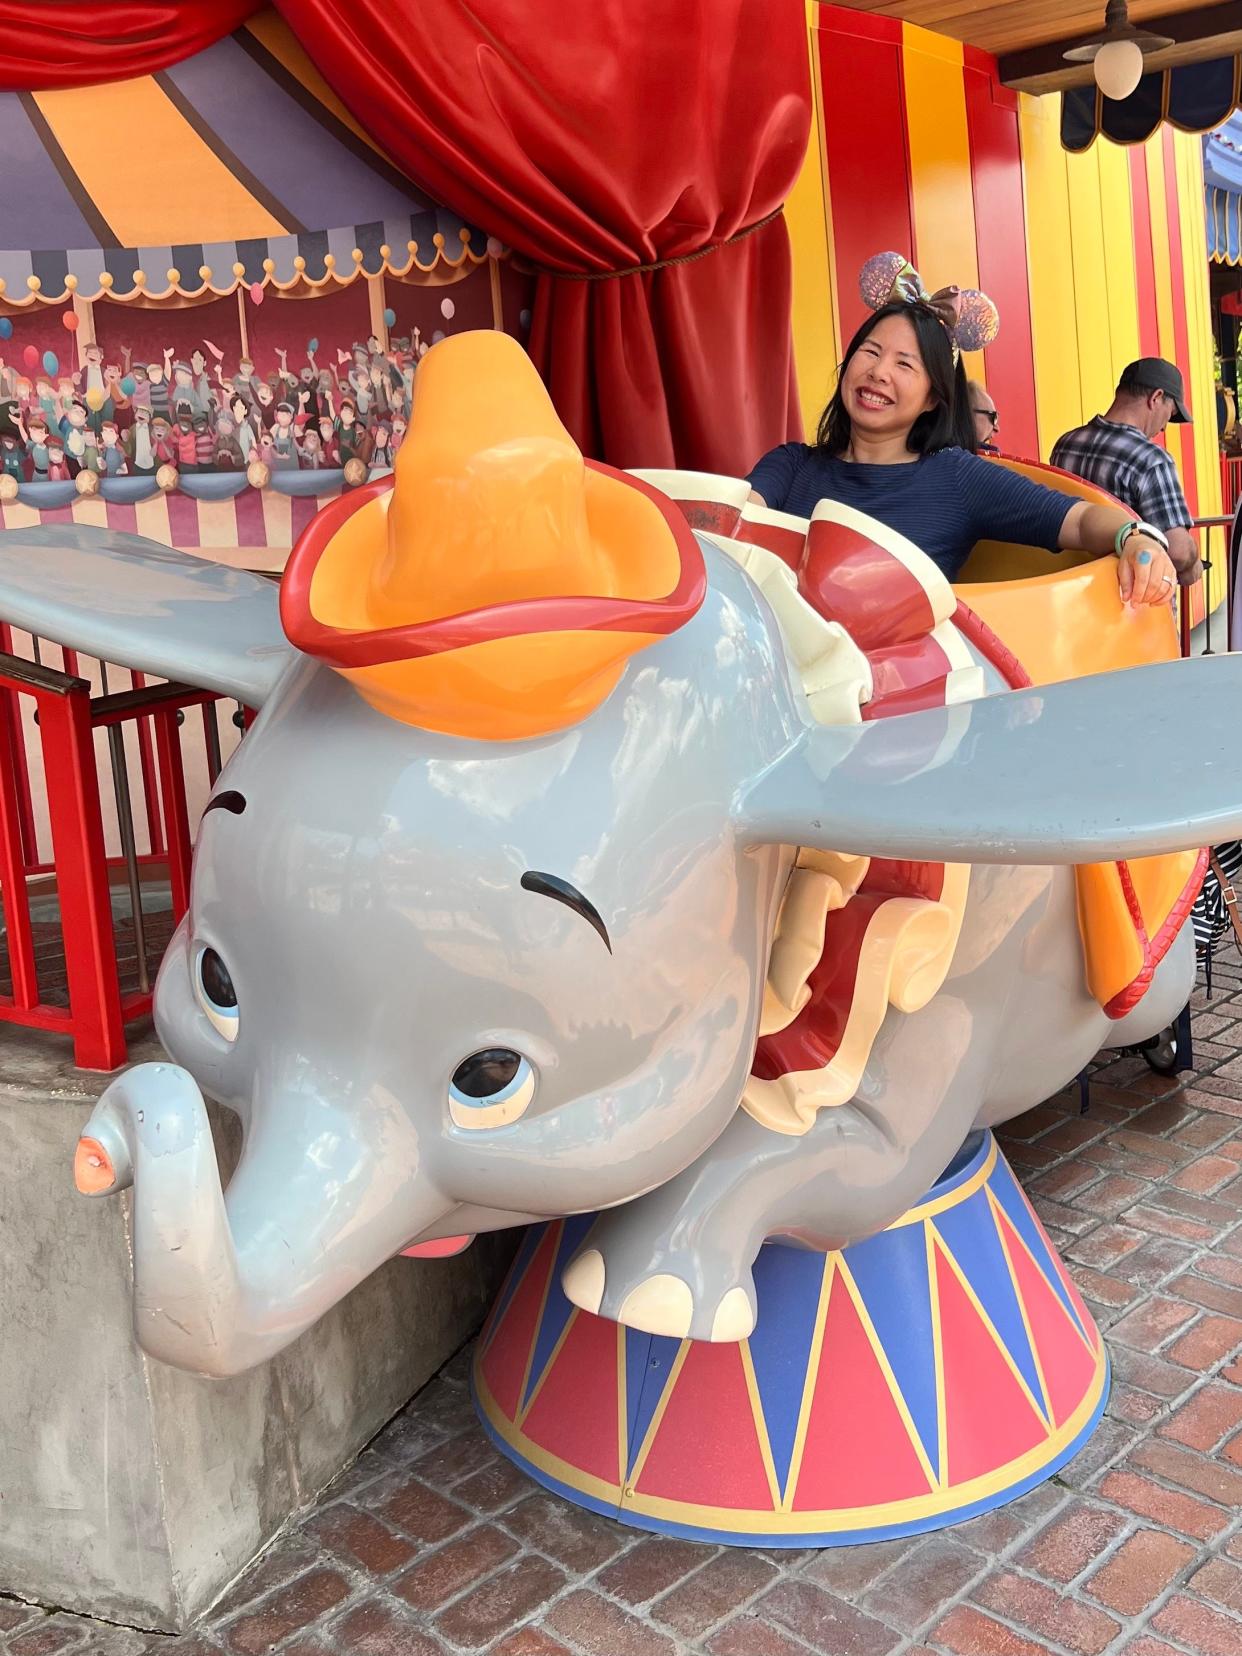 Fans of Dumbo the Flying Elephant can step right up for this photo opp in the Storybook Circus section of Walt Disney World's Magic Kingdom.